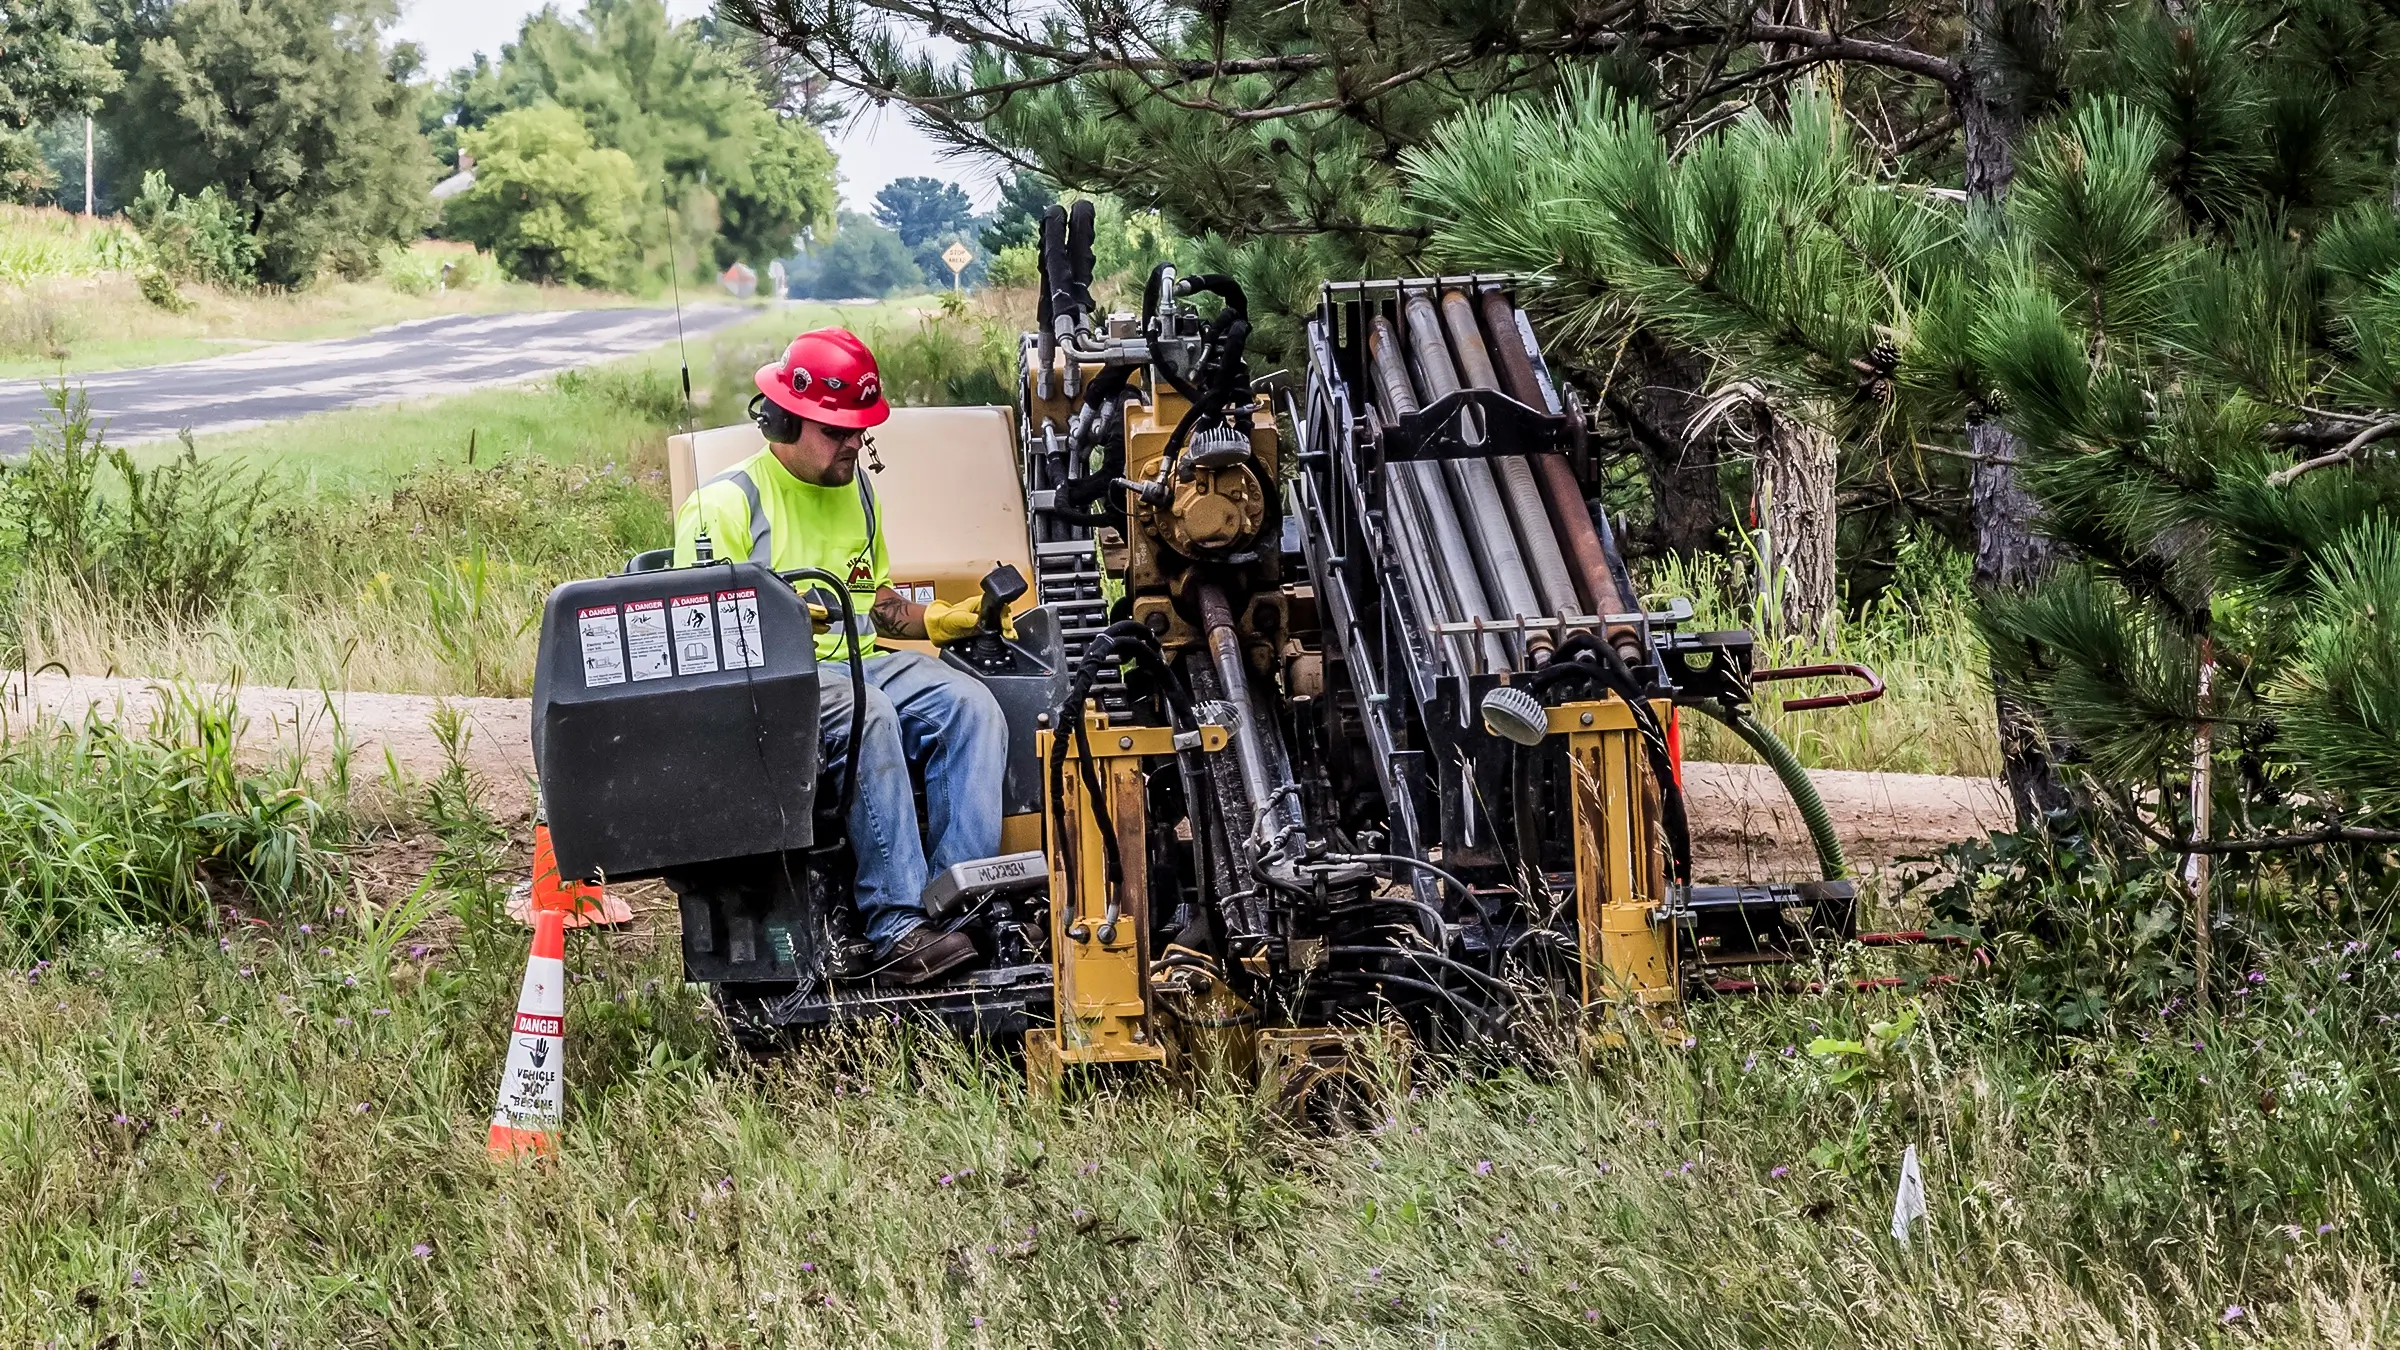 A crew member operates a cable HDD rig near a rural road.